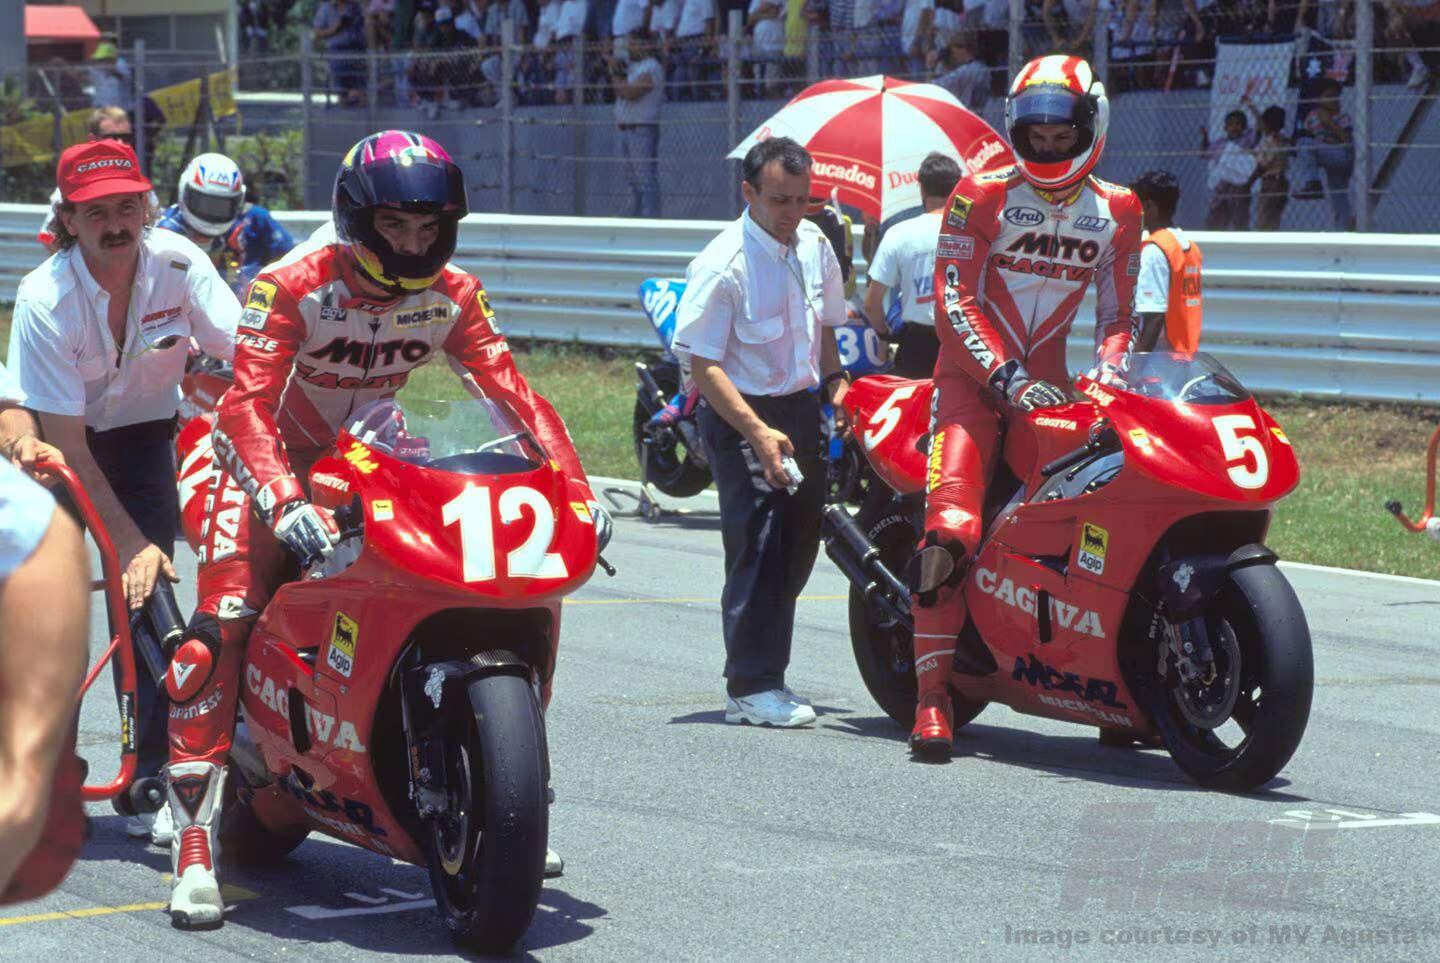 On the grid in ’93 with Doug Chandler (on right).